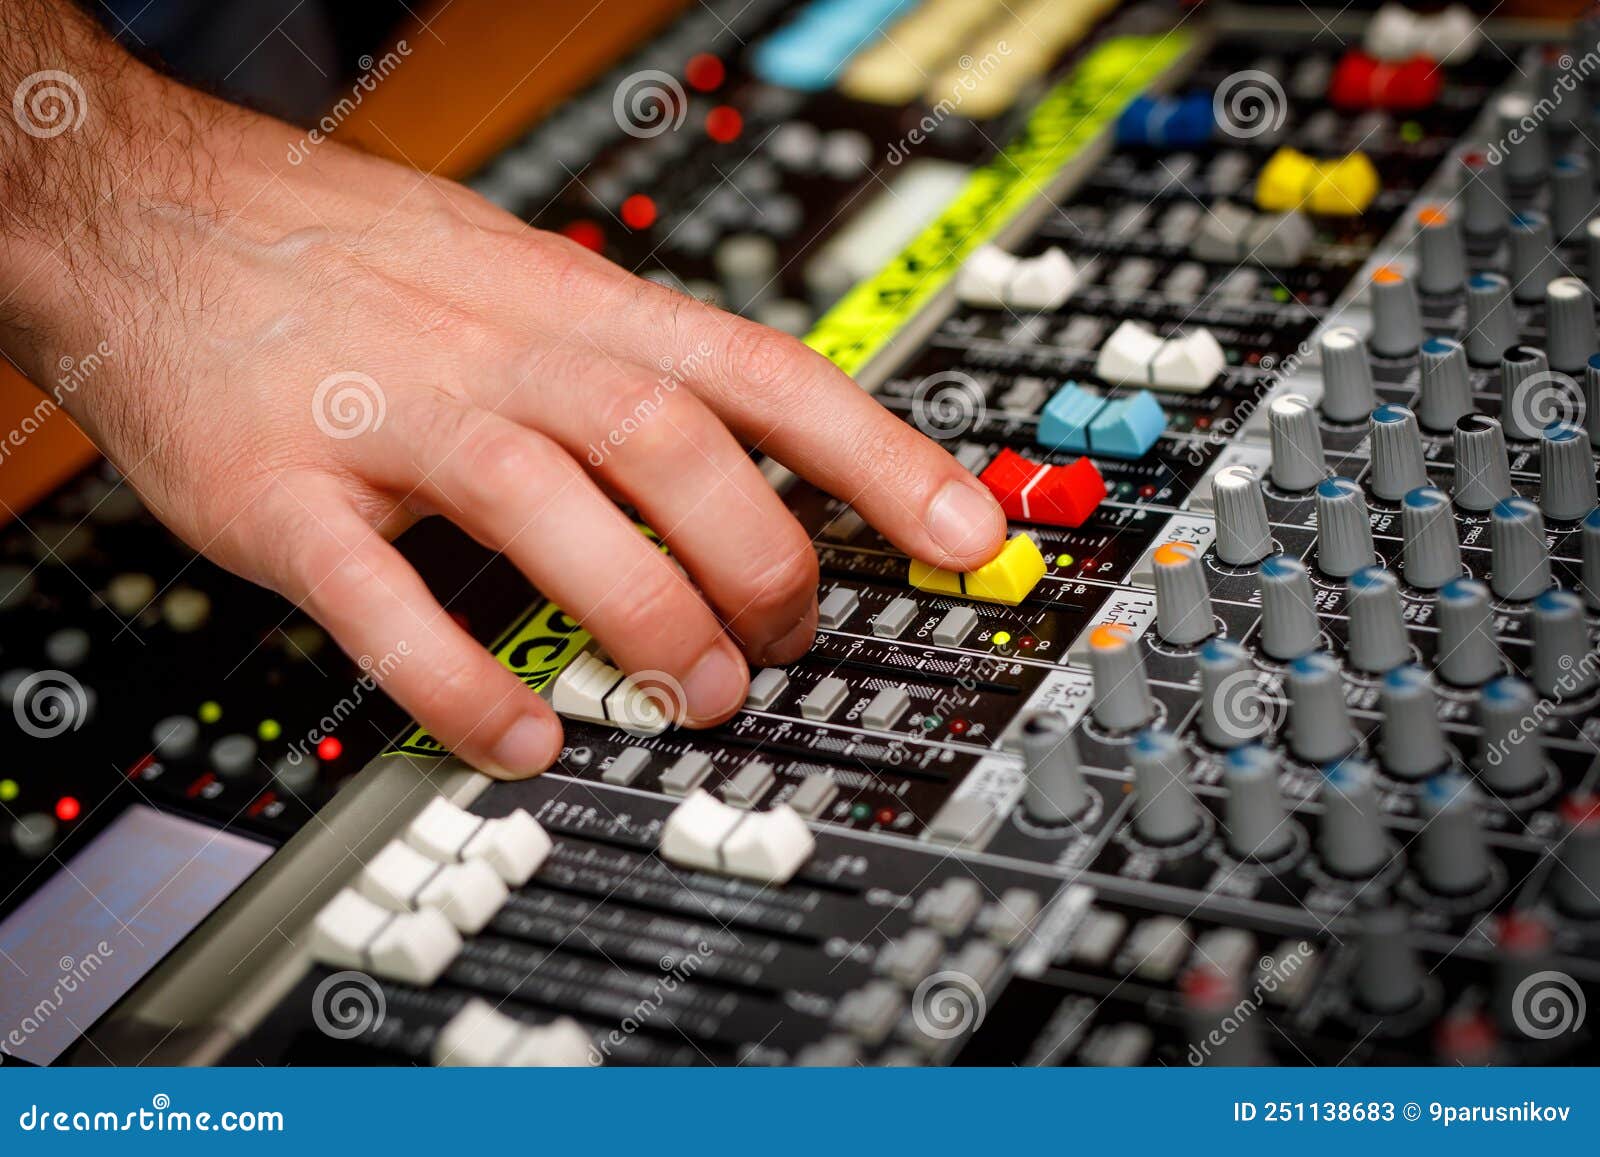 Hand of a Sound Manager on Sound Console Mixer. Equalizer Control ...